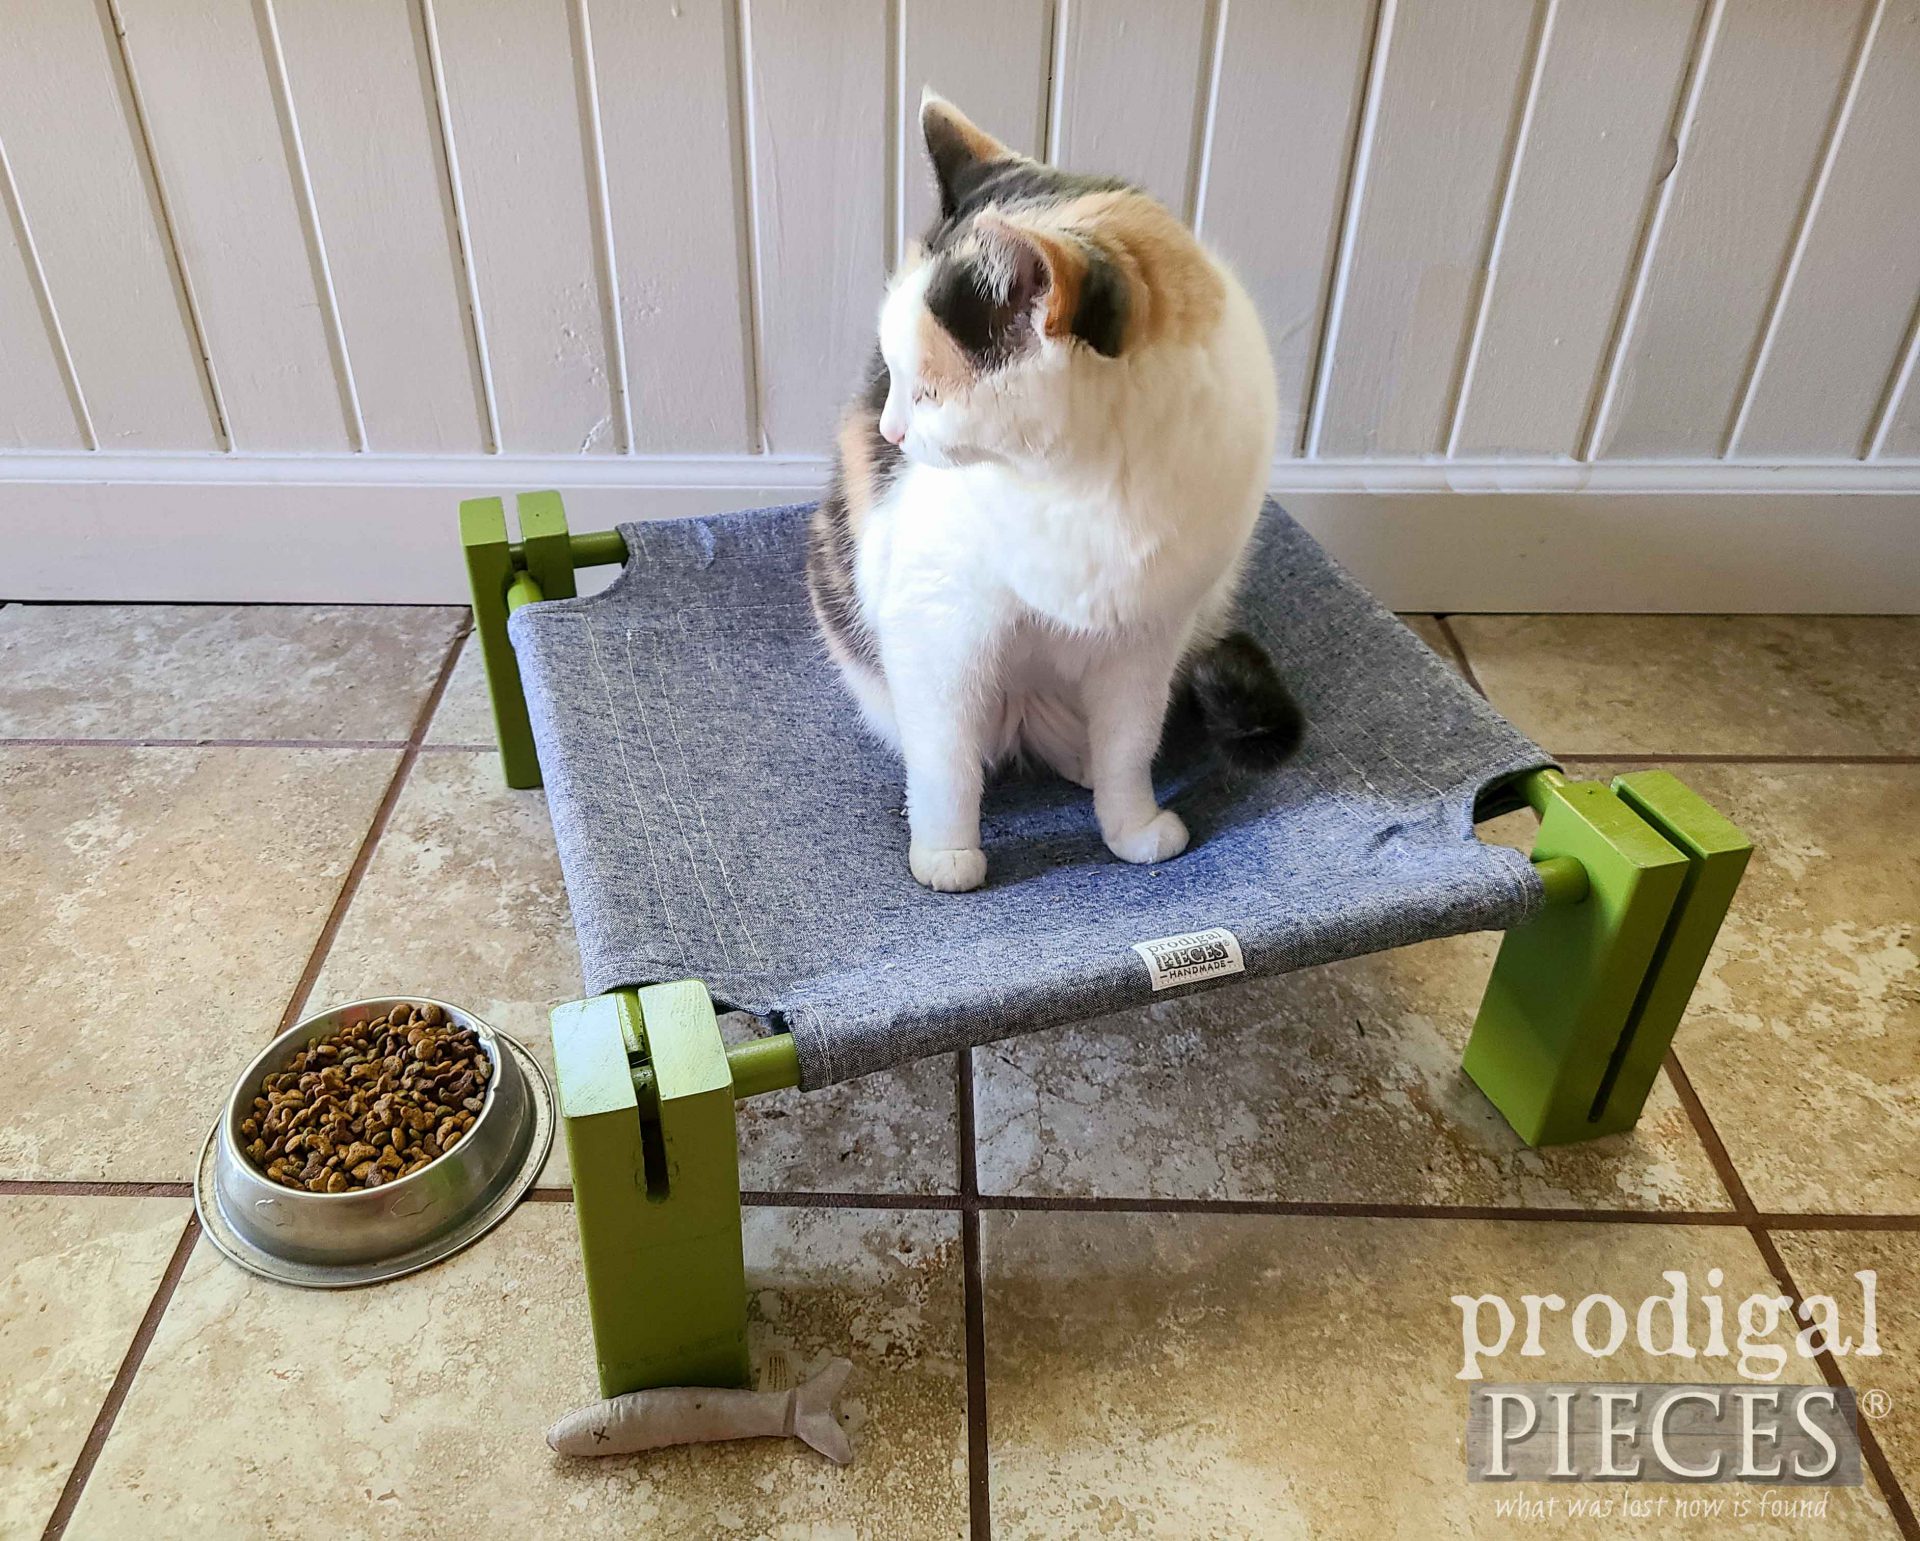 Top View of Cat Cot Hammock with a Sweet Calico Cat by Larissa of Prodigal Pieces | prodigalpieces.com #prodigalpieces #cat #diy #pet #dog #handmade